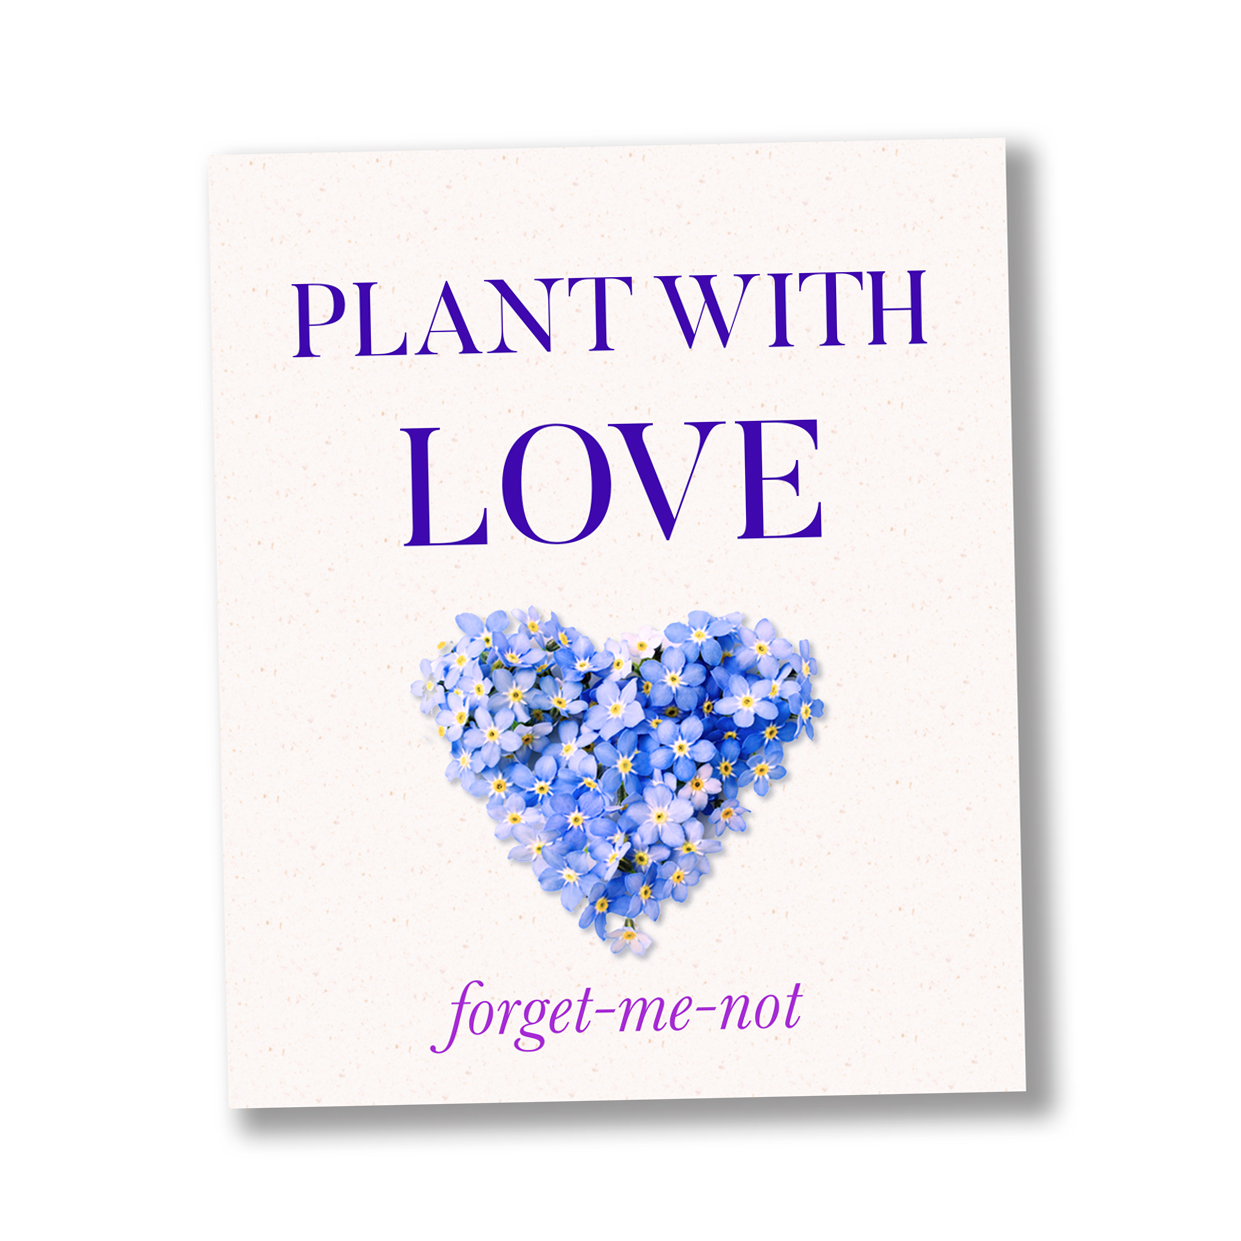 PLANT WITH LOVE